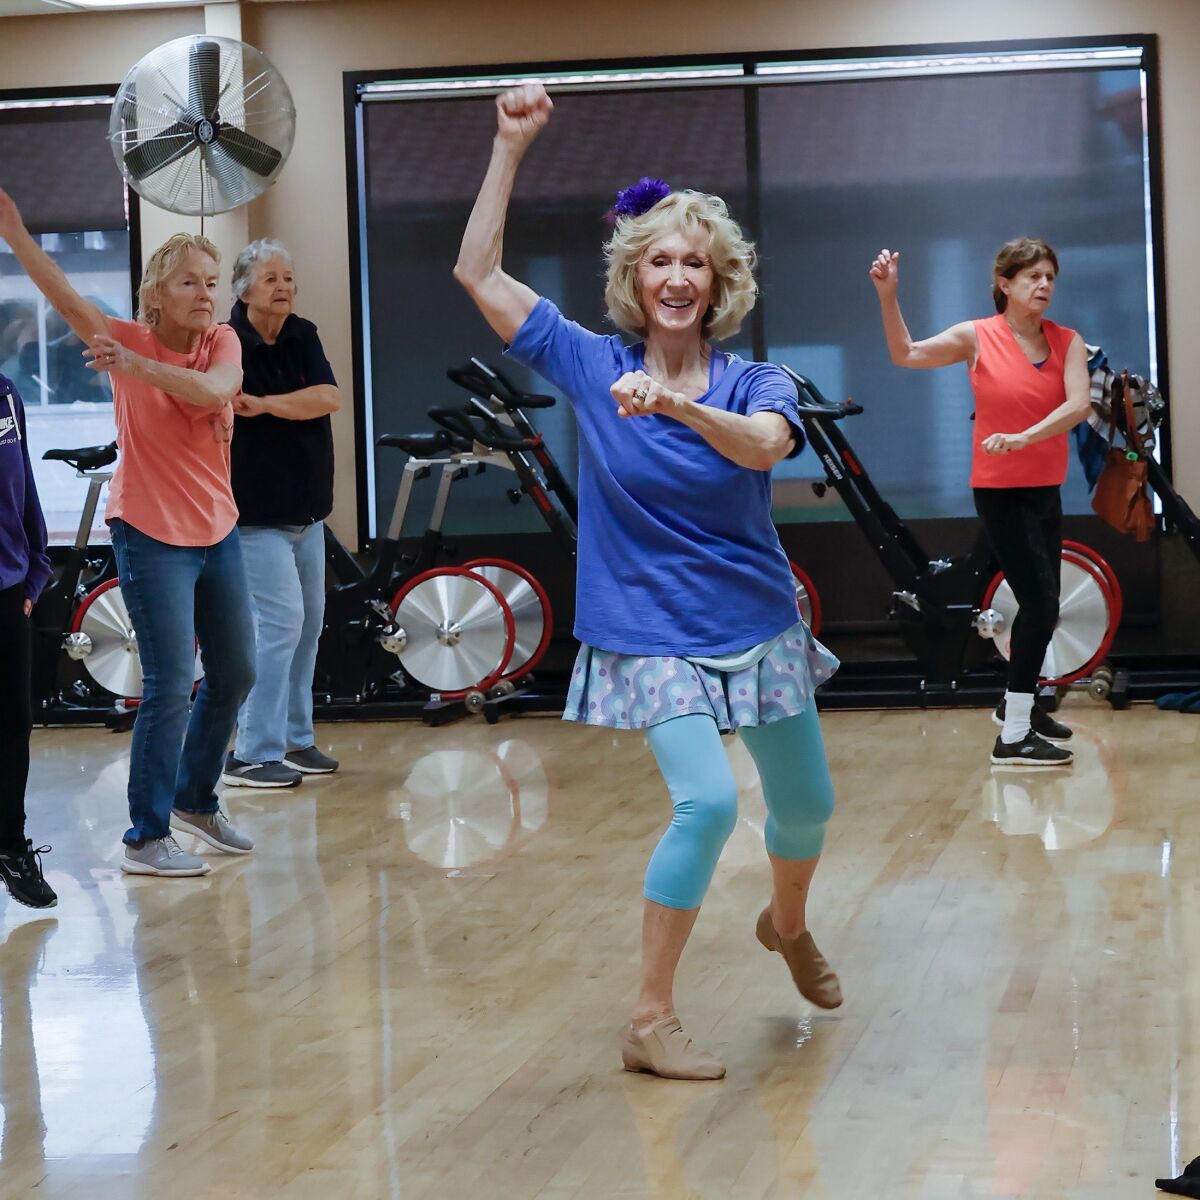 Cheri Pogeler leads a dance class at the Magdalena Ecke Family YMCA.